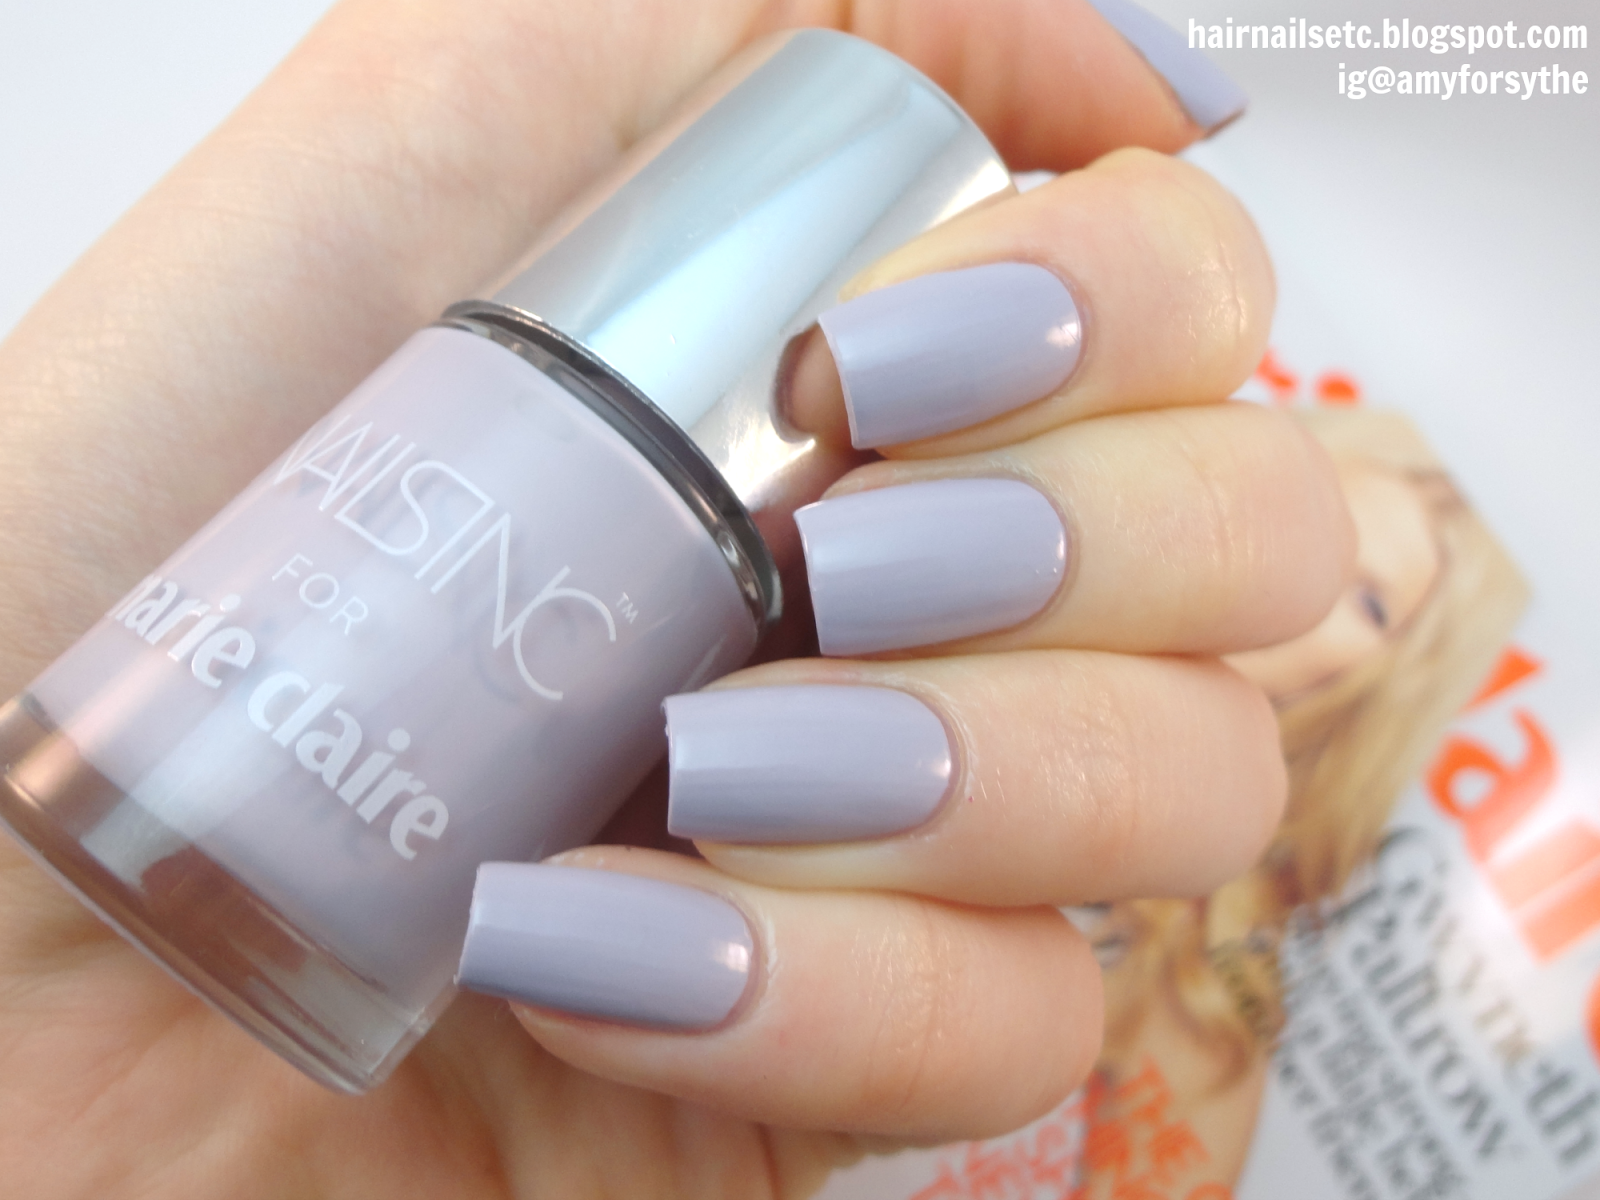 Swatches and Review of the Free Nails Inc 'Fashion' Lilac Nail Polish with Marie Claire April 2015 Magazine - hairnailsetc.blogspot.co.uk / ig@amyforsythe